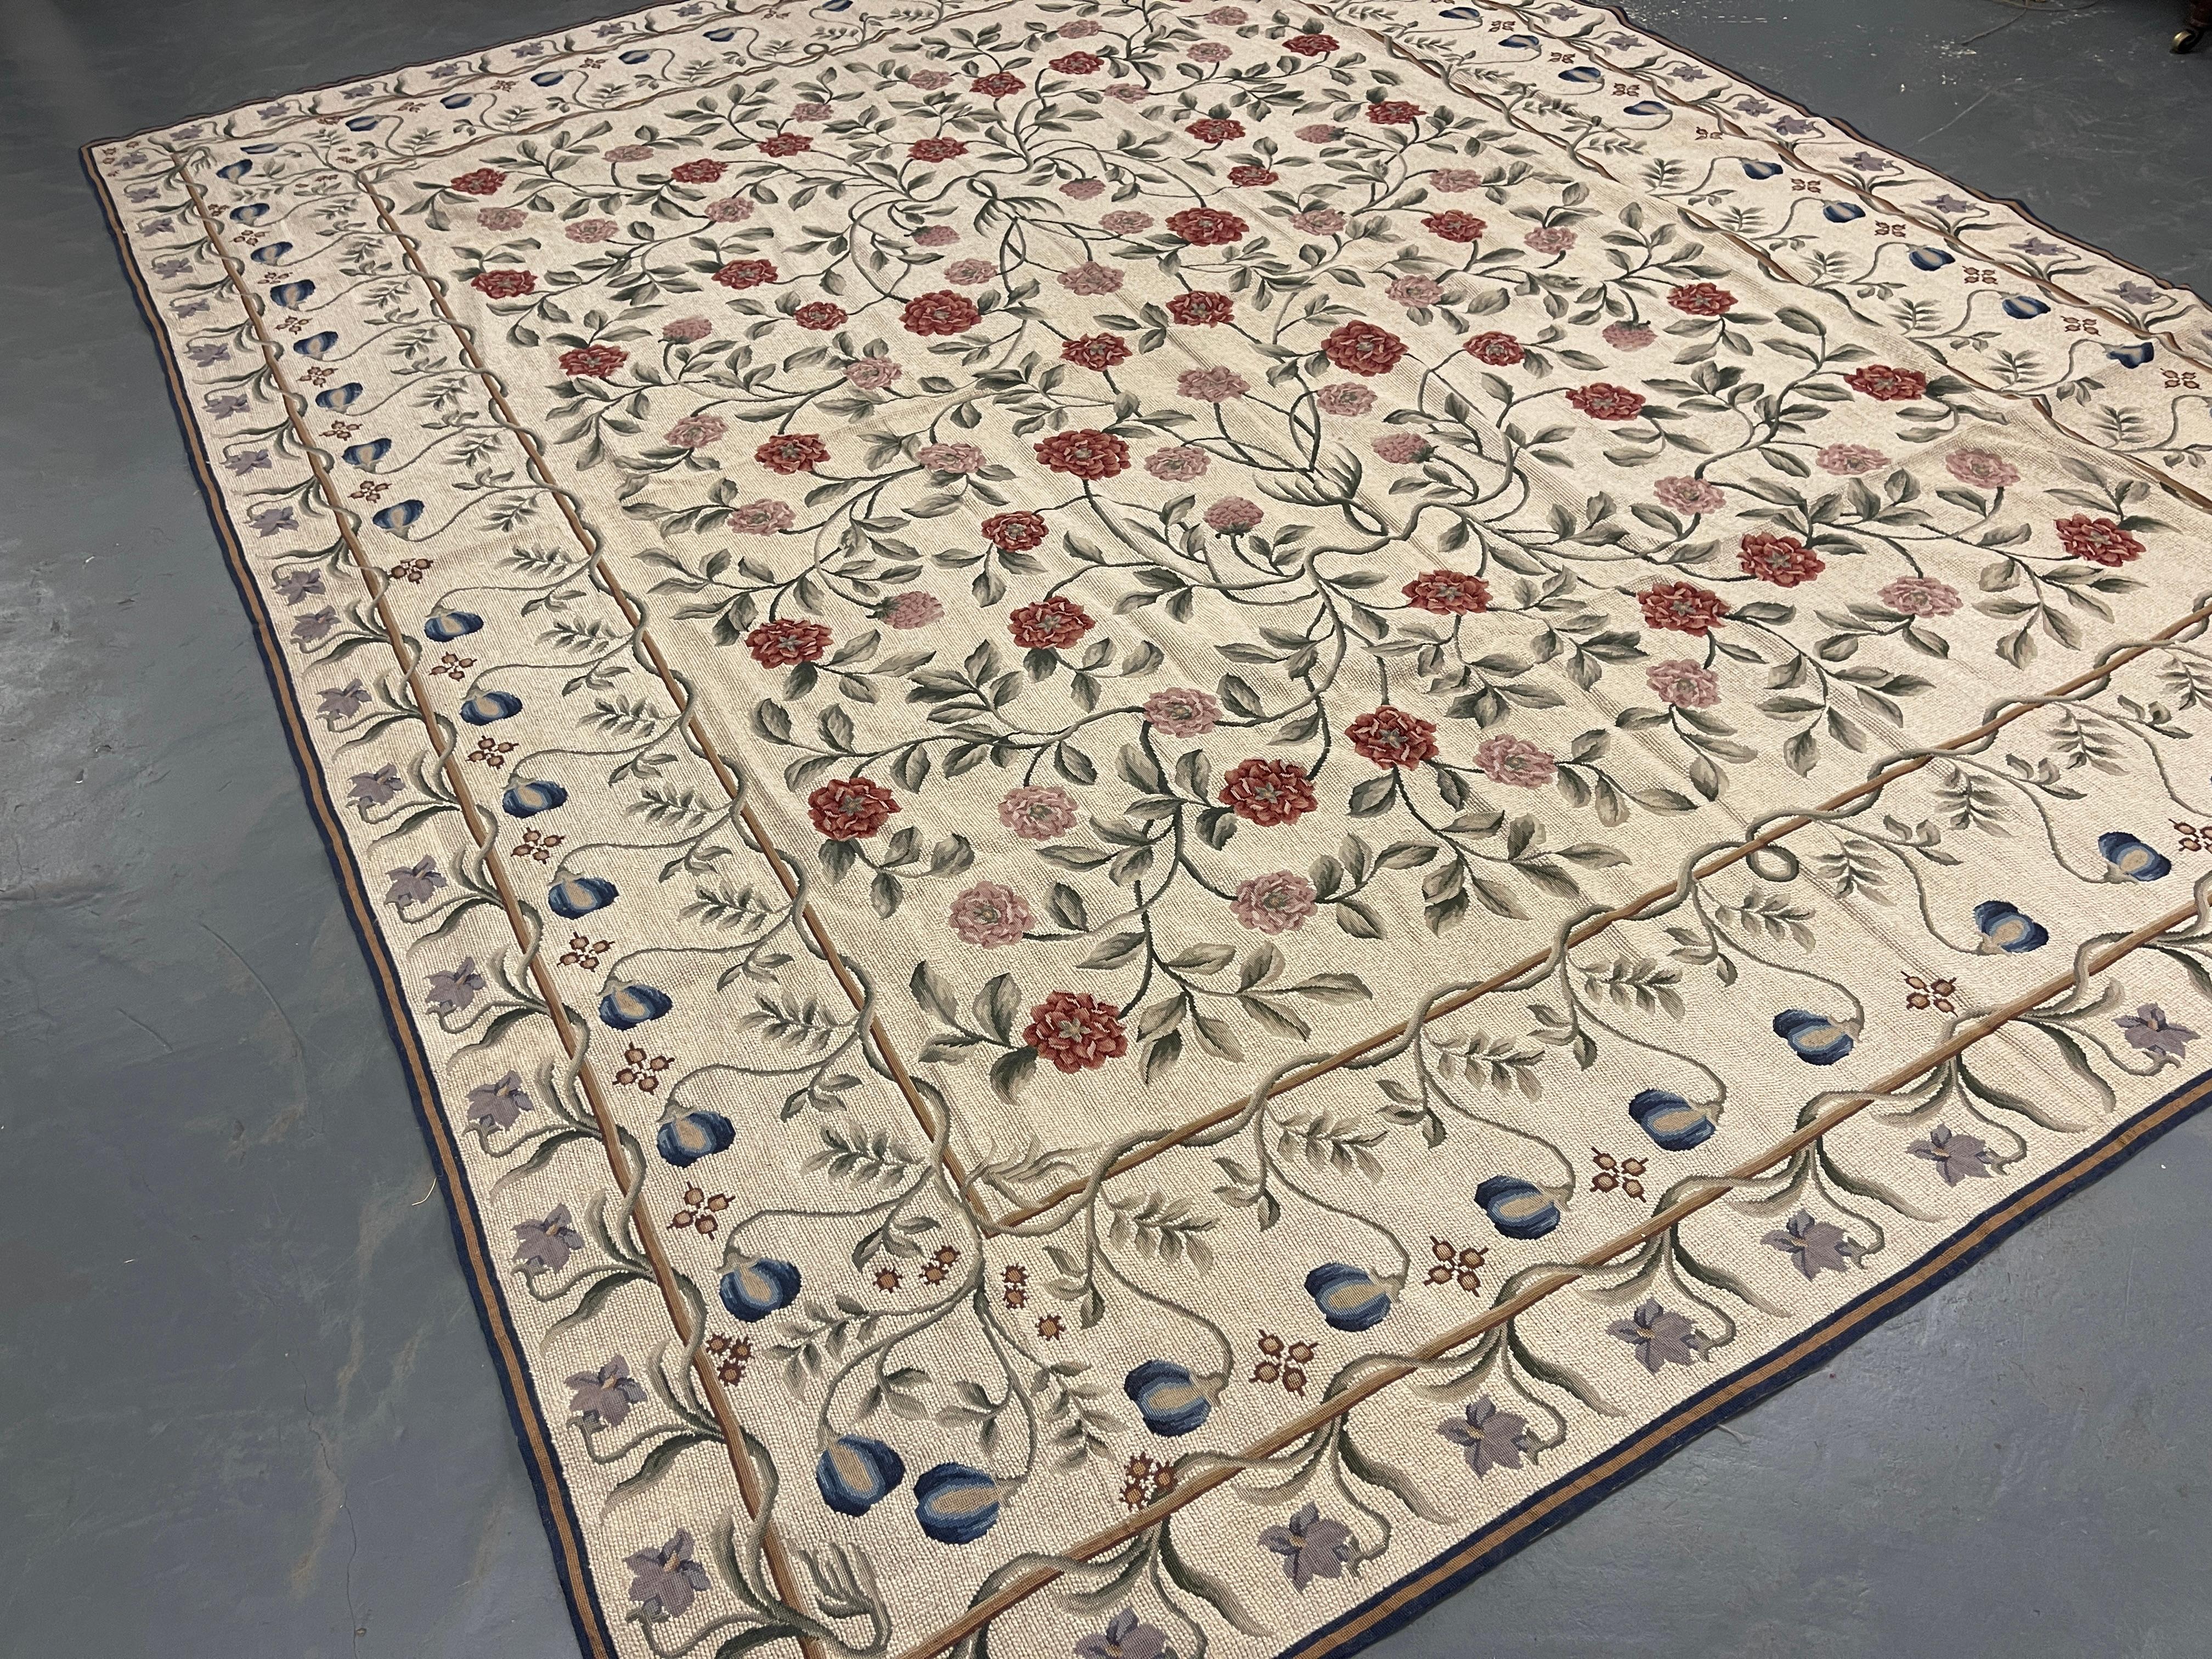 This fantastic floral rug has been handwoven with a beautiful all-over floral design woven on an ivory background with cream-green, blue and ivory accents. This elegant piece's colour and design make it the perfect accent rug.
This rug style is best